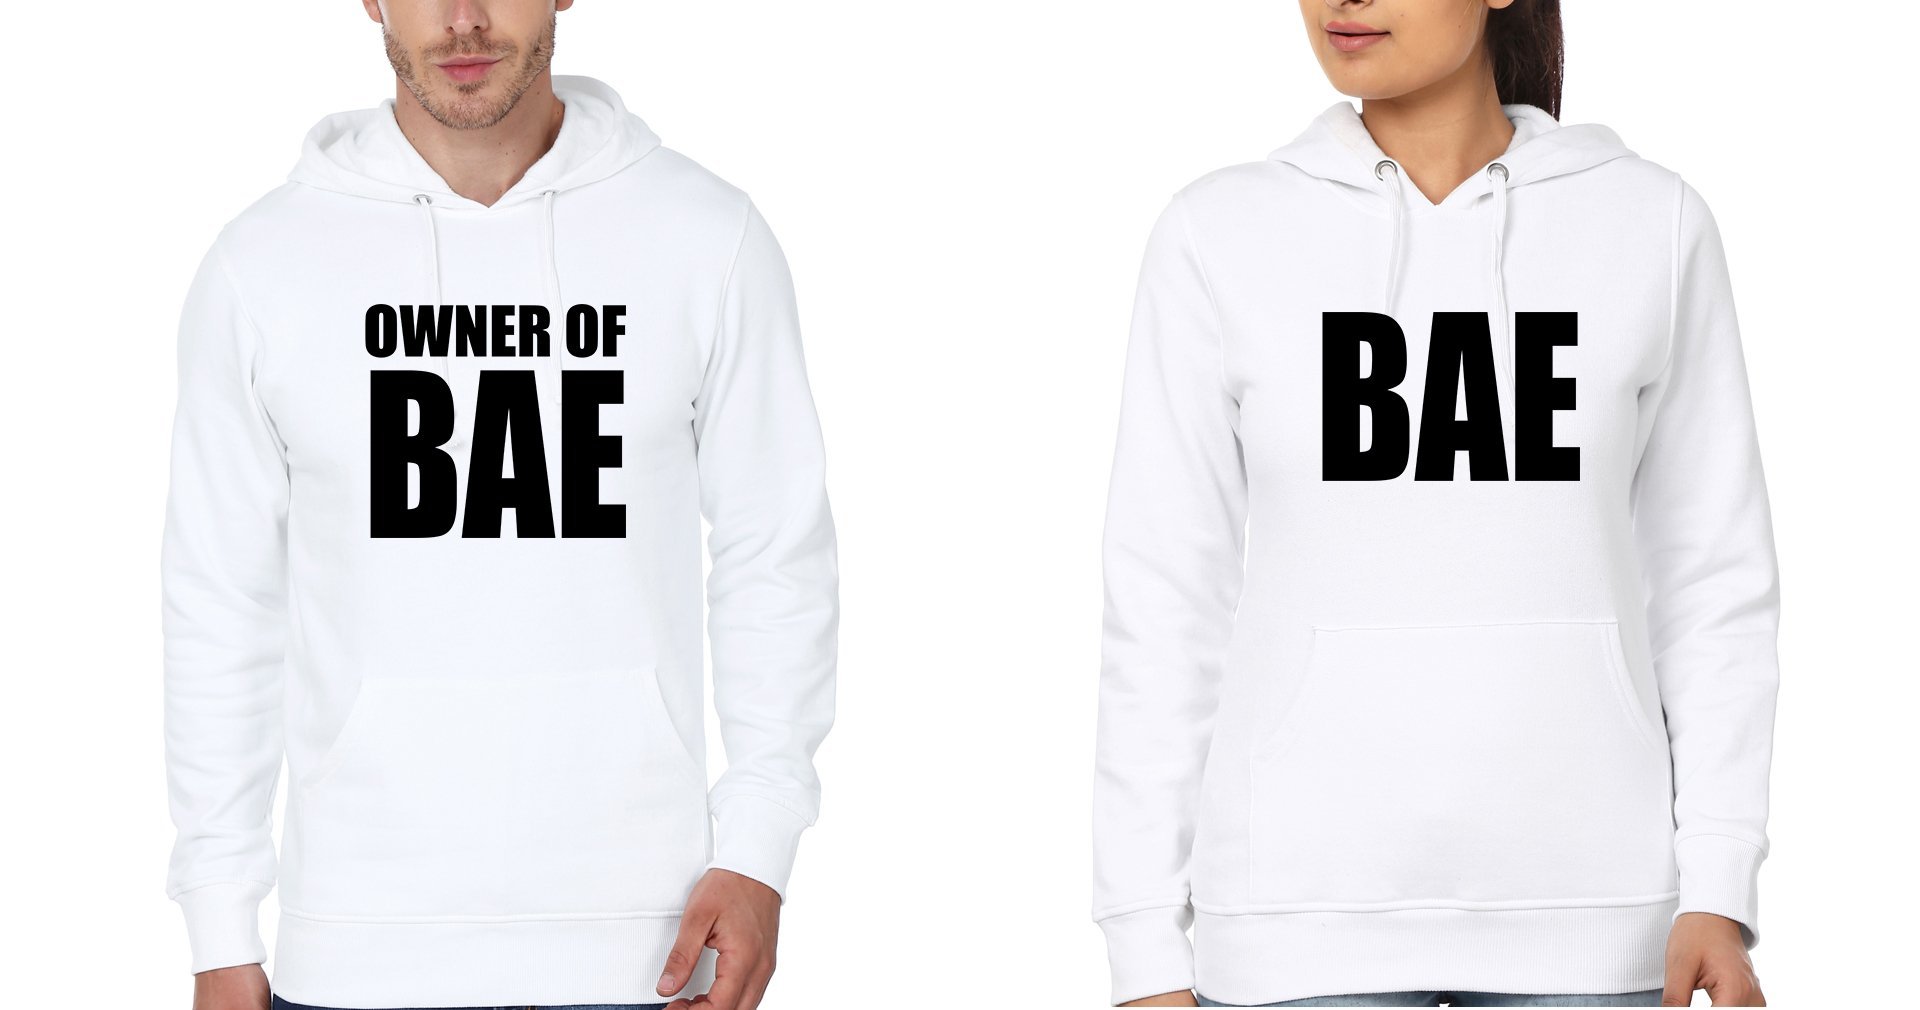 BAE&Owner of BAE Couple Hoodie-FunkyTradition - FunkyTradition